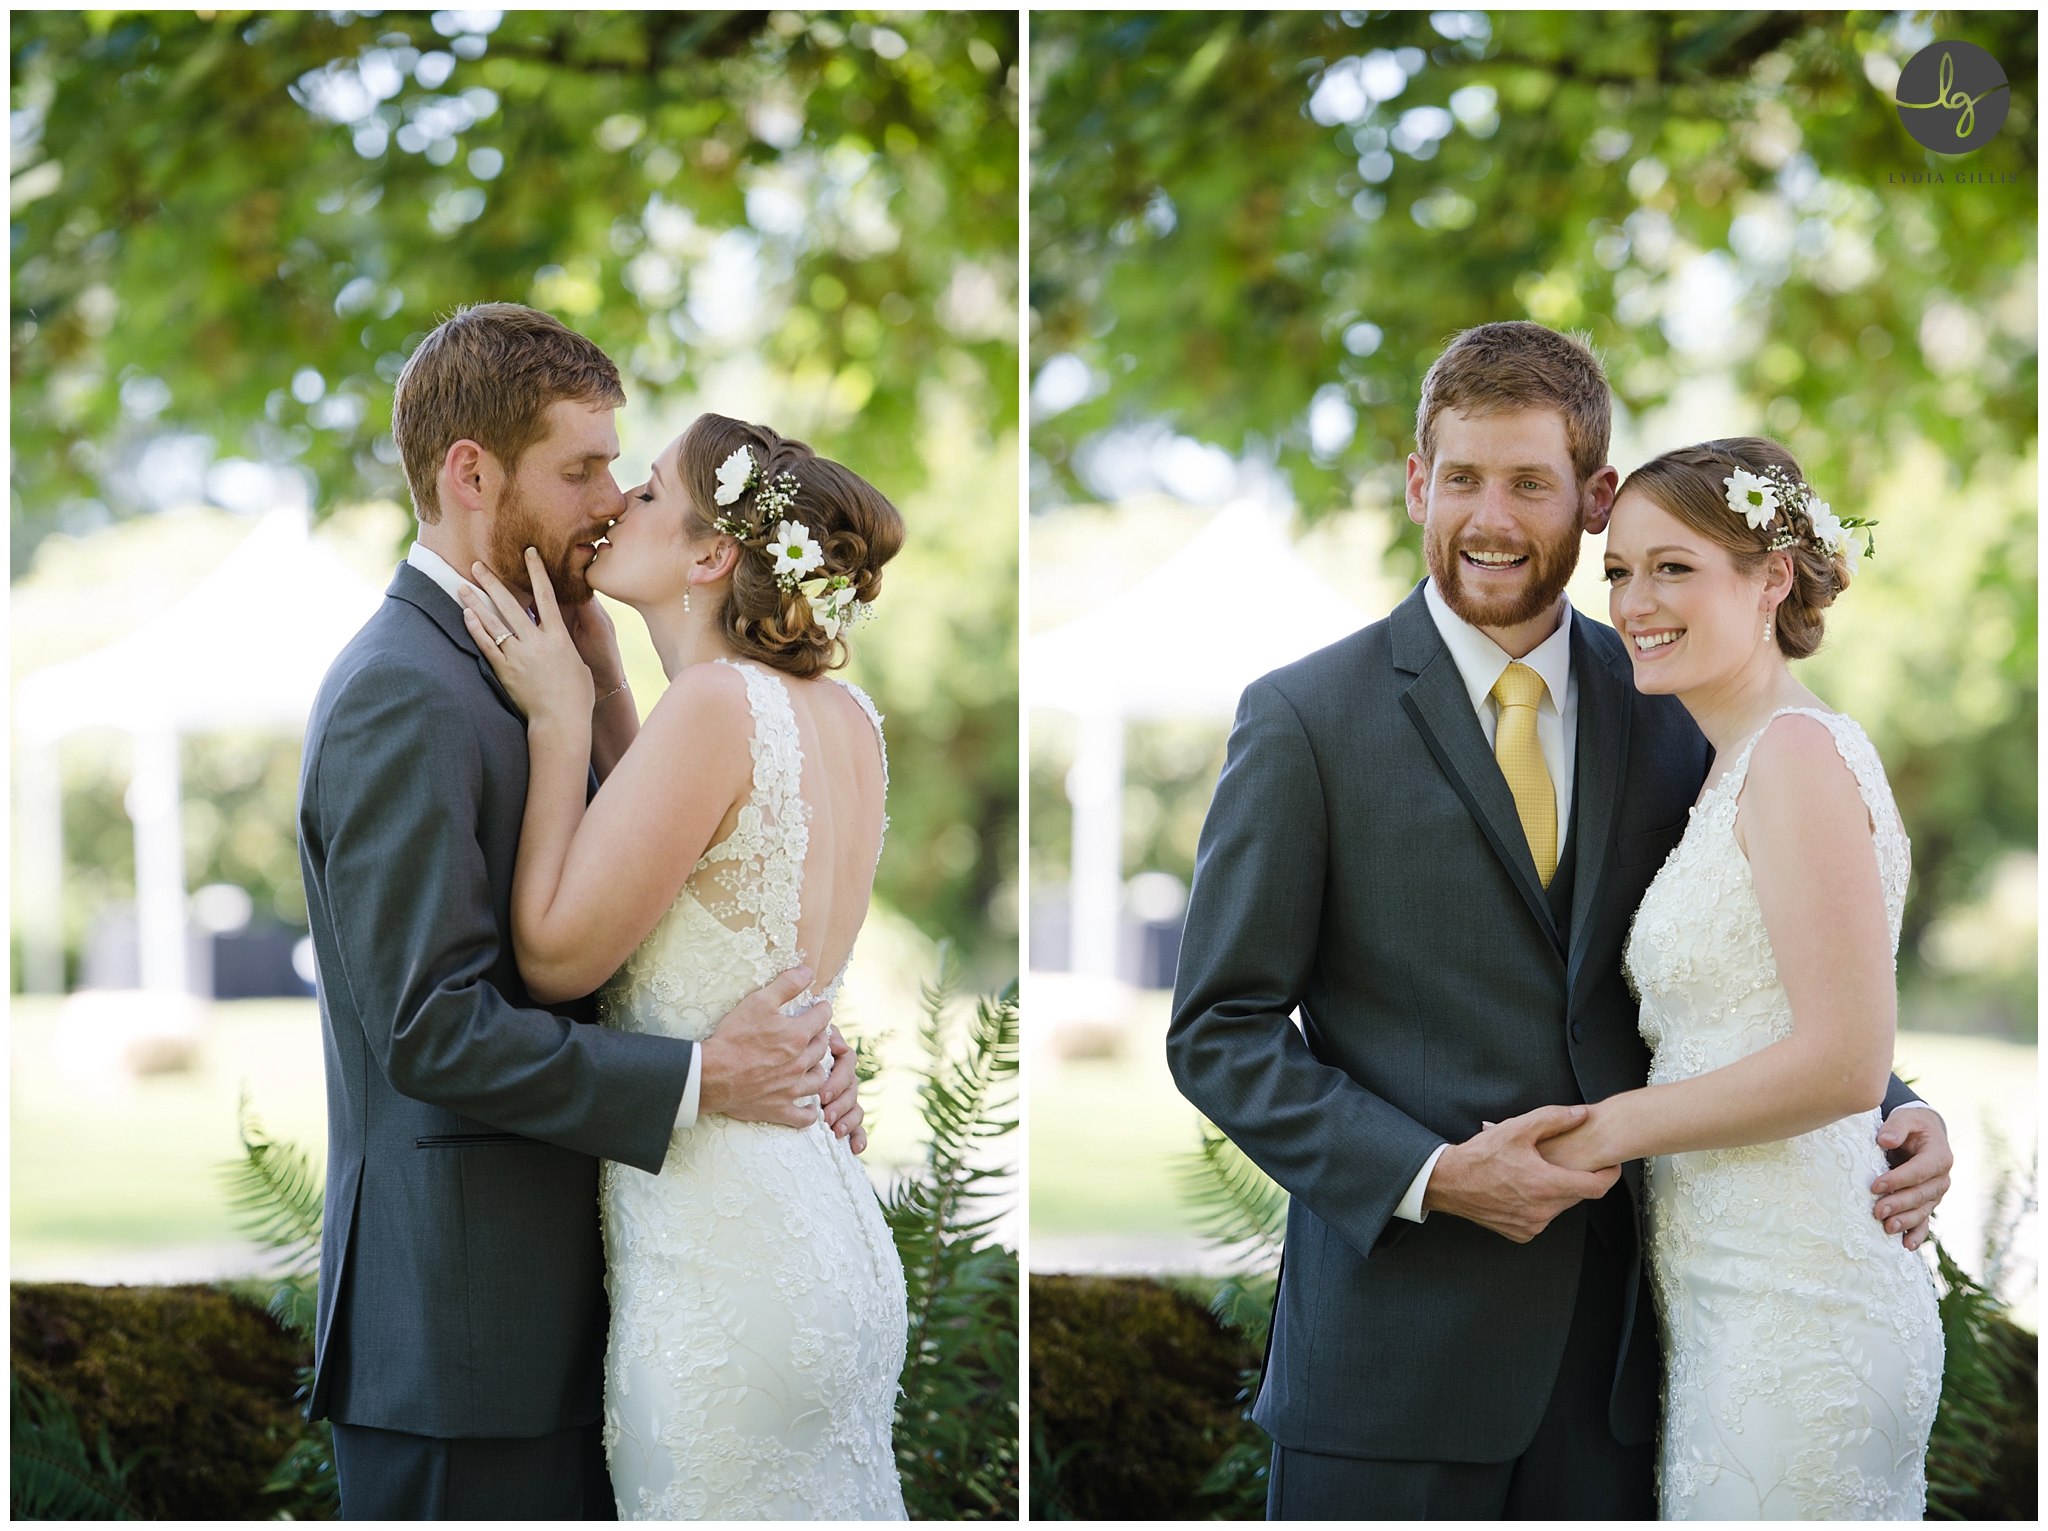 Outdoor wedding picture of bride and groom | Lydia Gillis Photography 